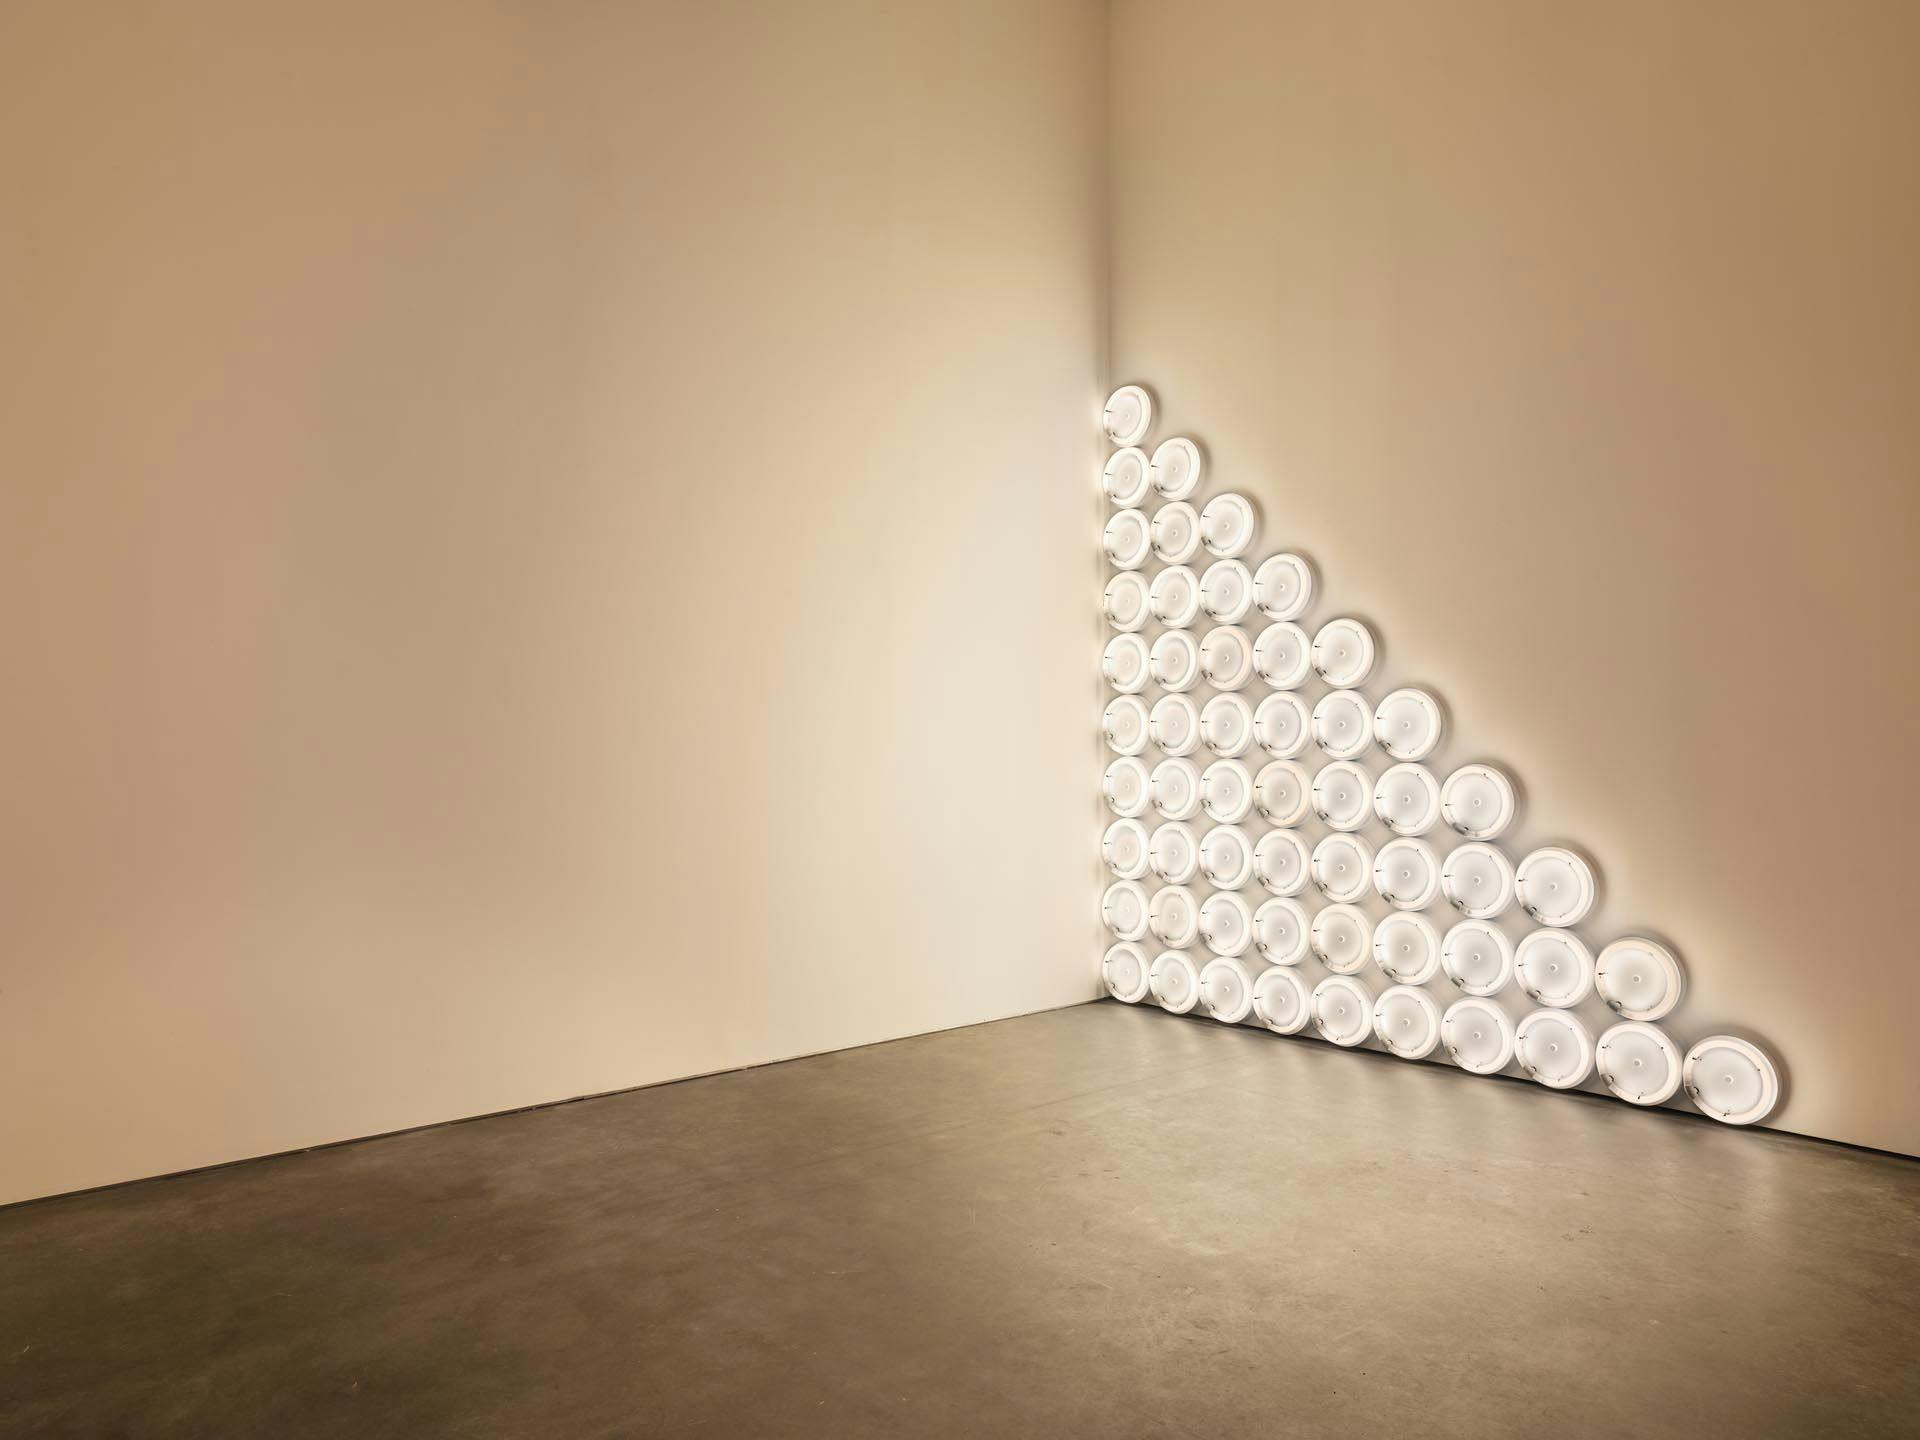 A corner sculpture in warm white fluorescent light by Dan Flavin, titled untitled (to a man, George McGovern) 2, dated 1972